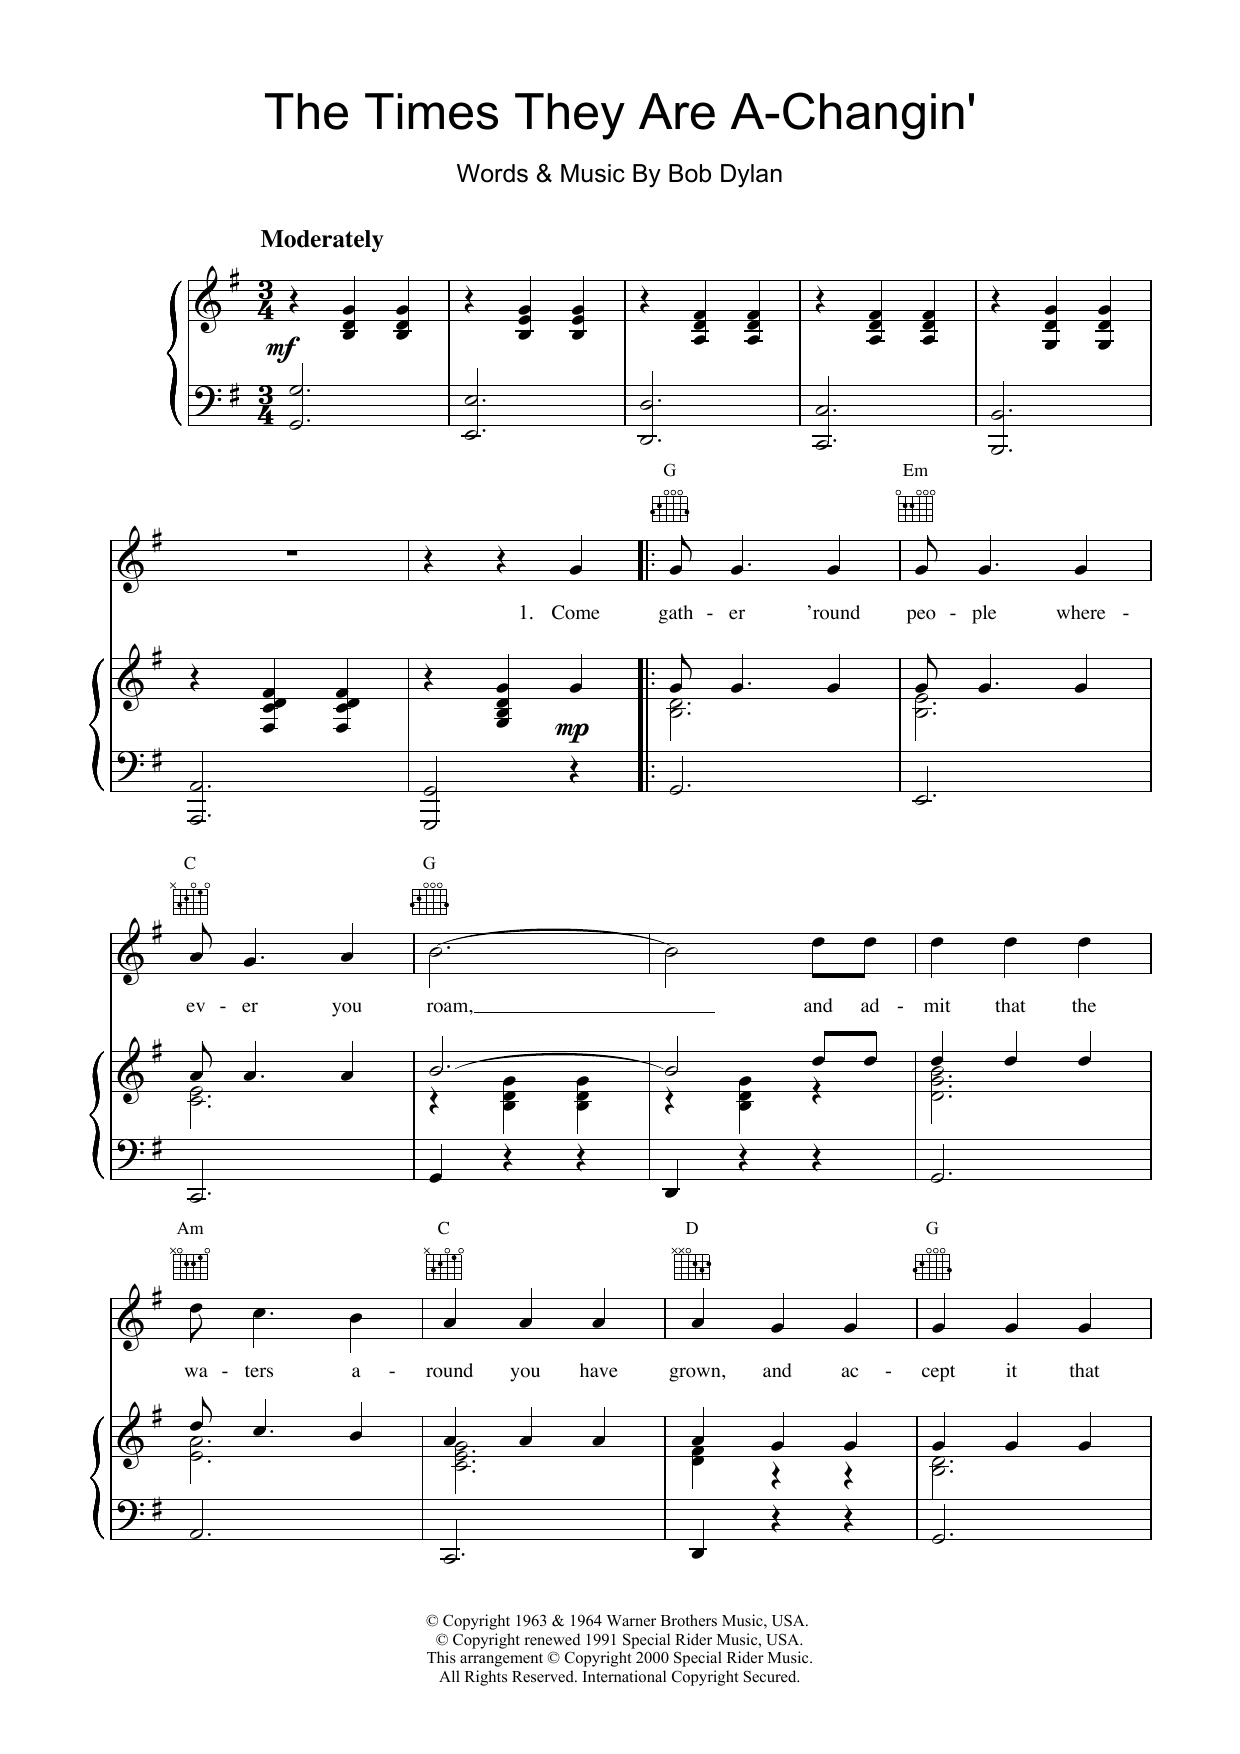 Bob Dylan The Times They Are A-Changin' sheet music notes printable PDF score